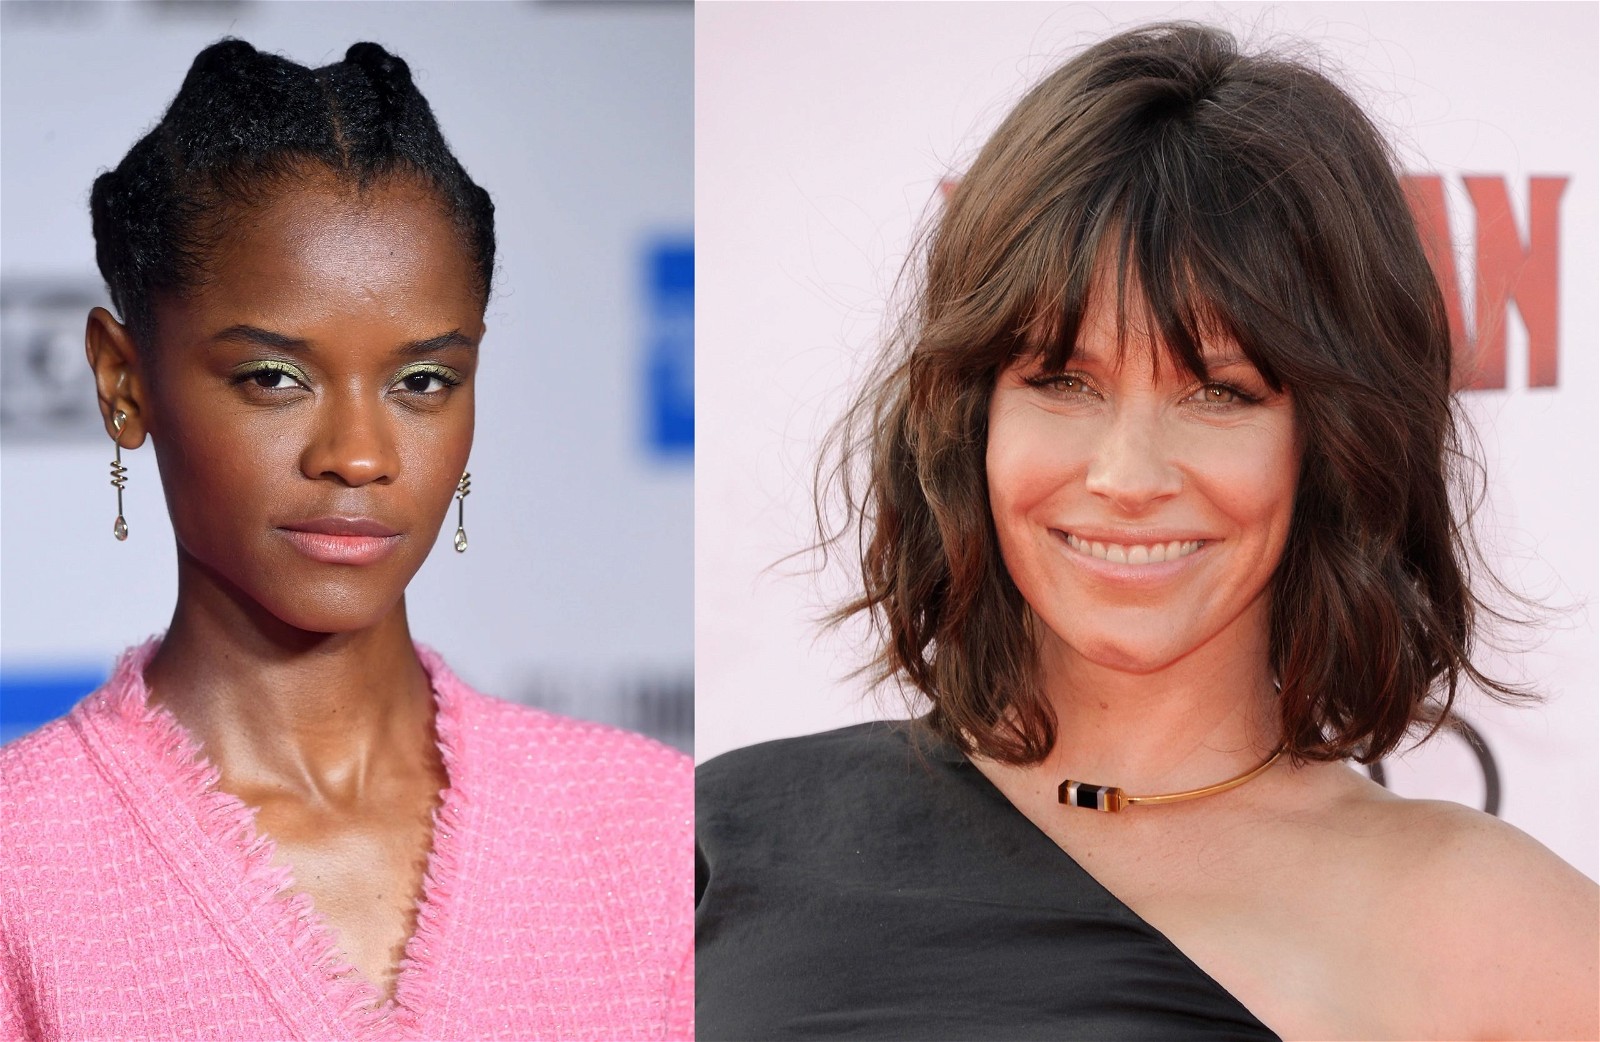 Letitia Wright and Evangeline Lilly